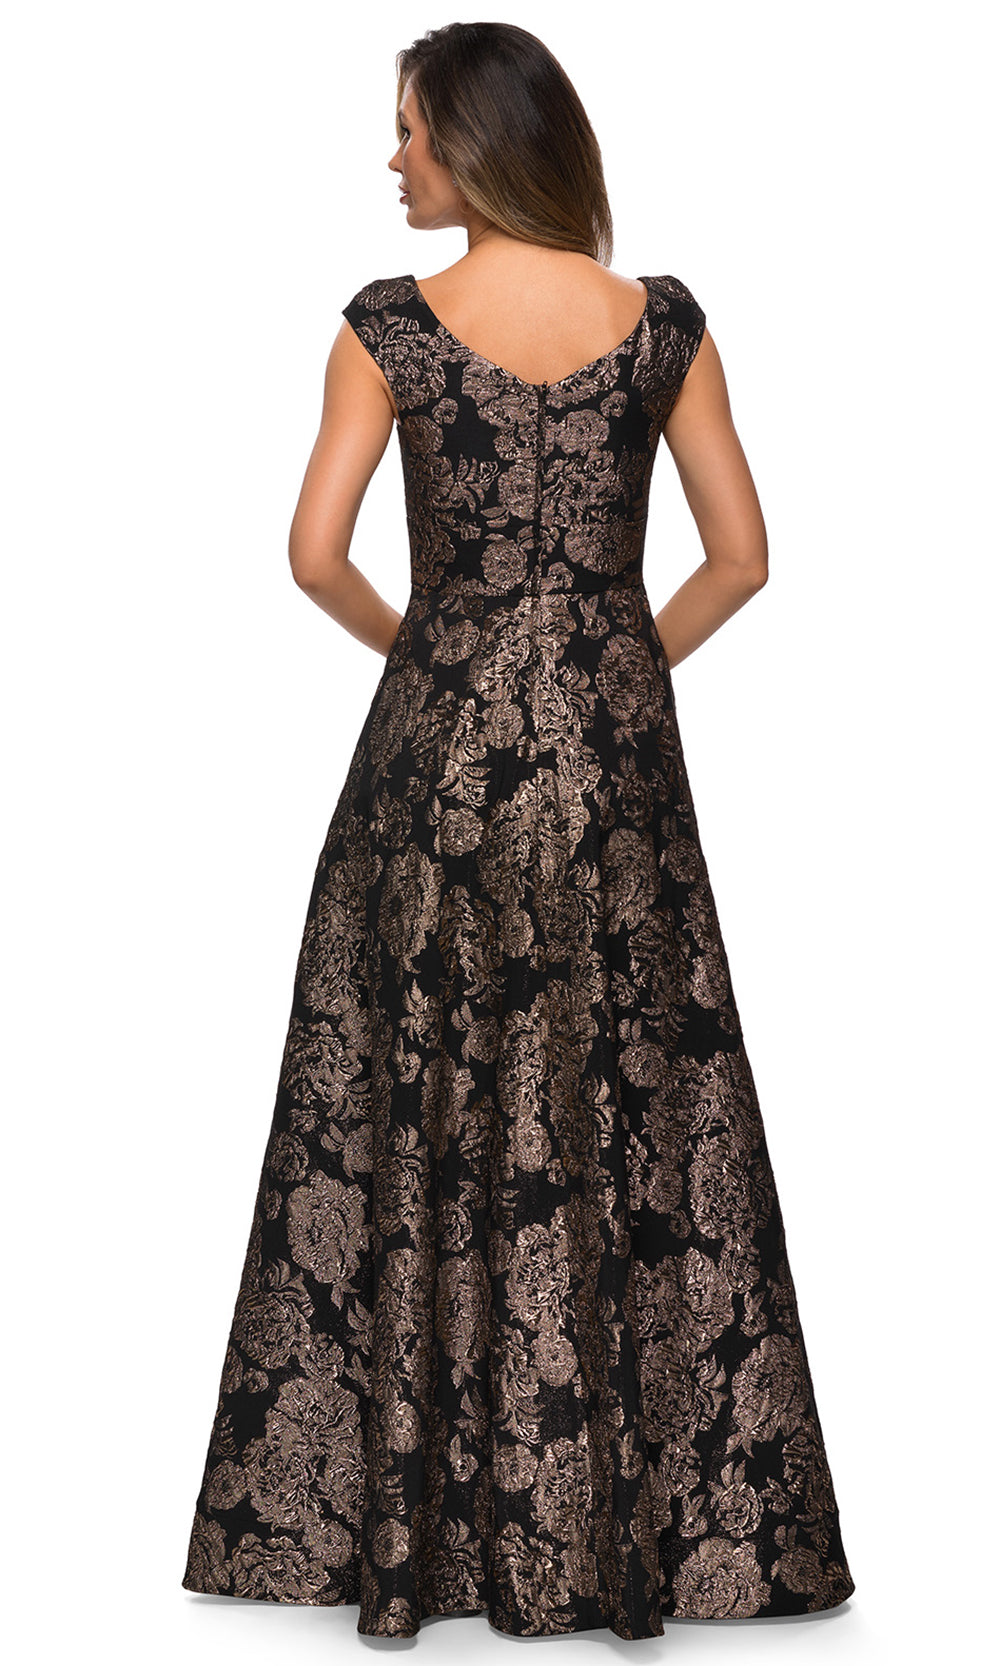 La Femme - 27999 Floral Sweetheart A-Line Dress In Black and Gold